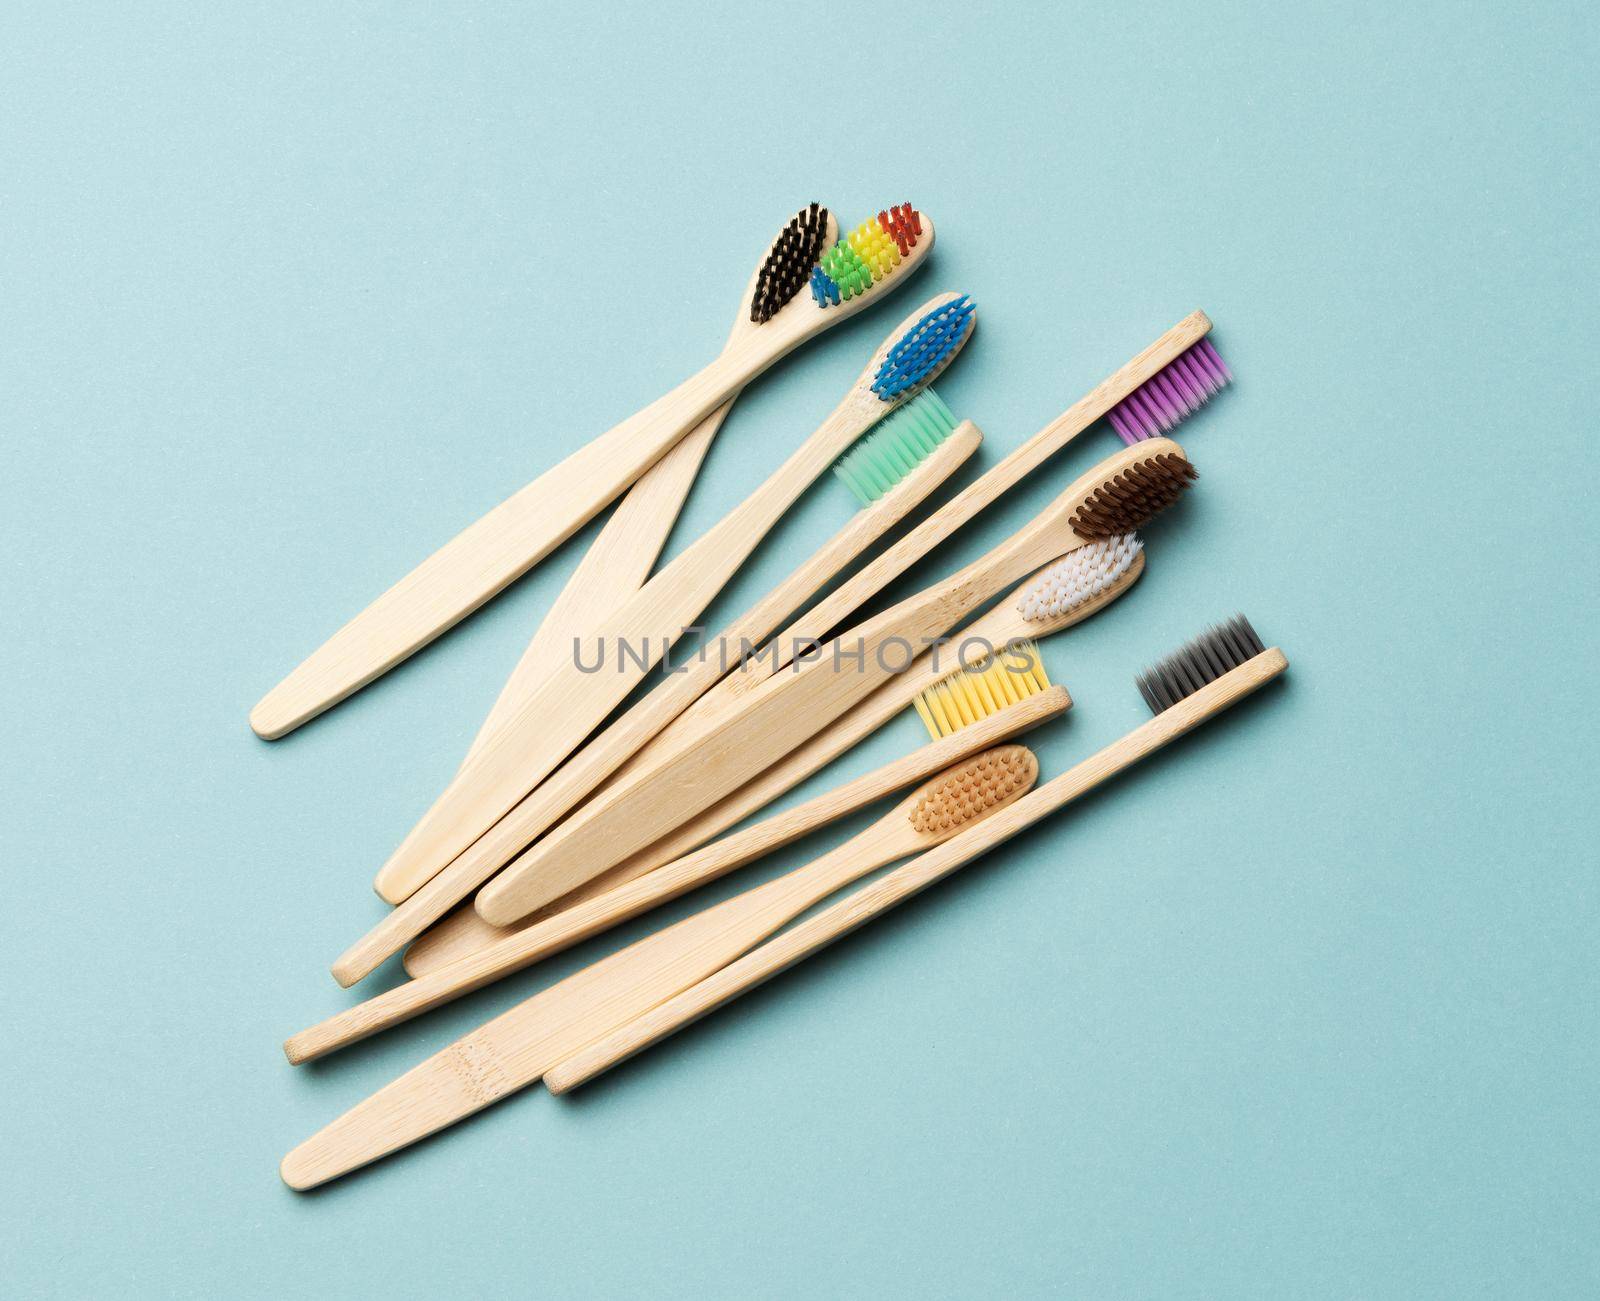 multicolored wooden toothbrushes on a blue background, plastic rejection concept, zero waste, top view